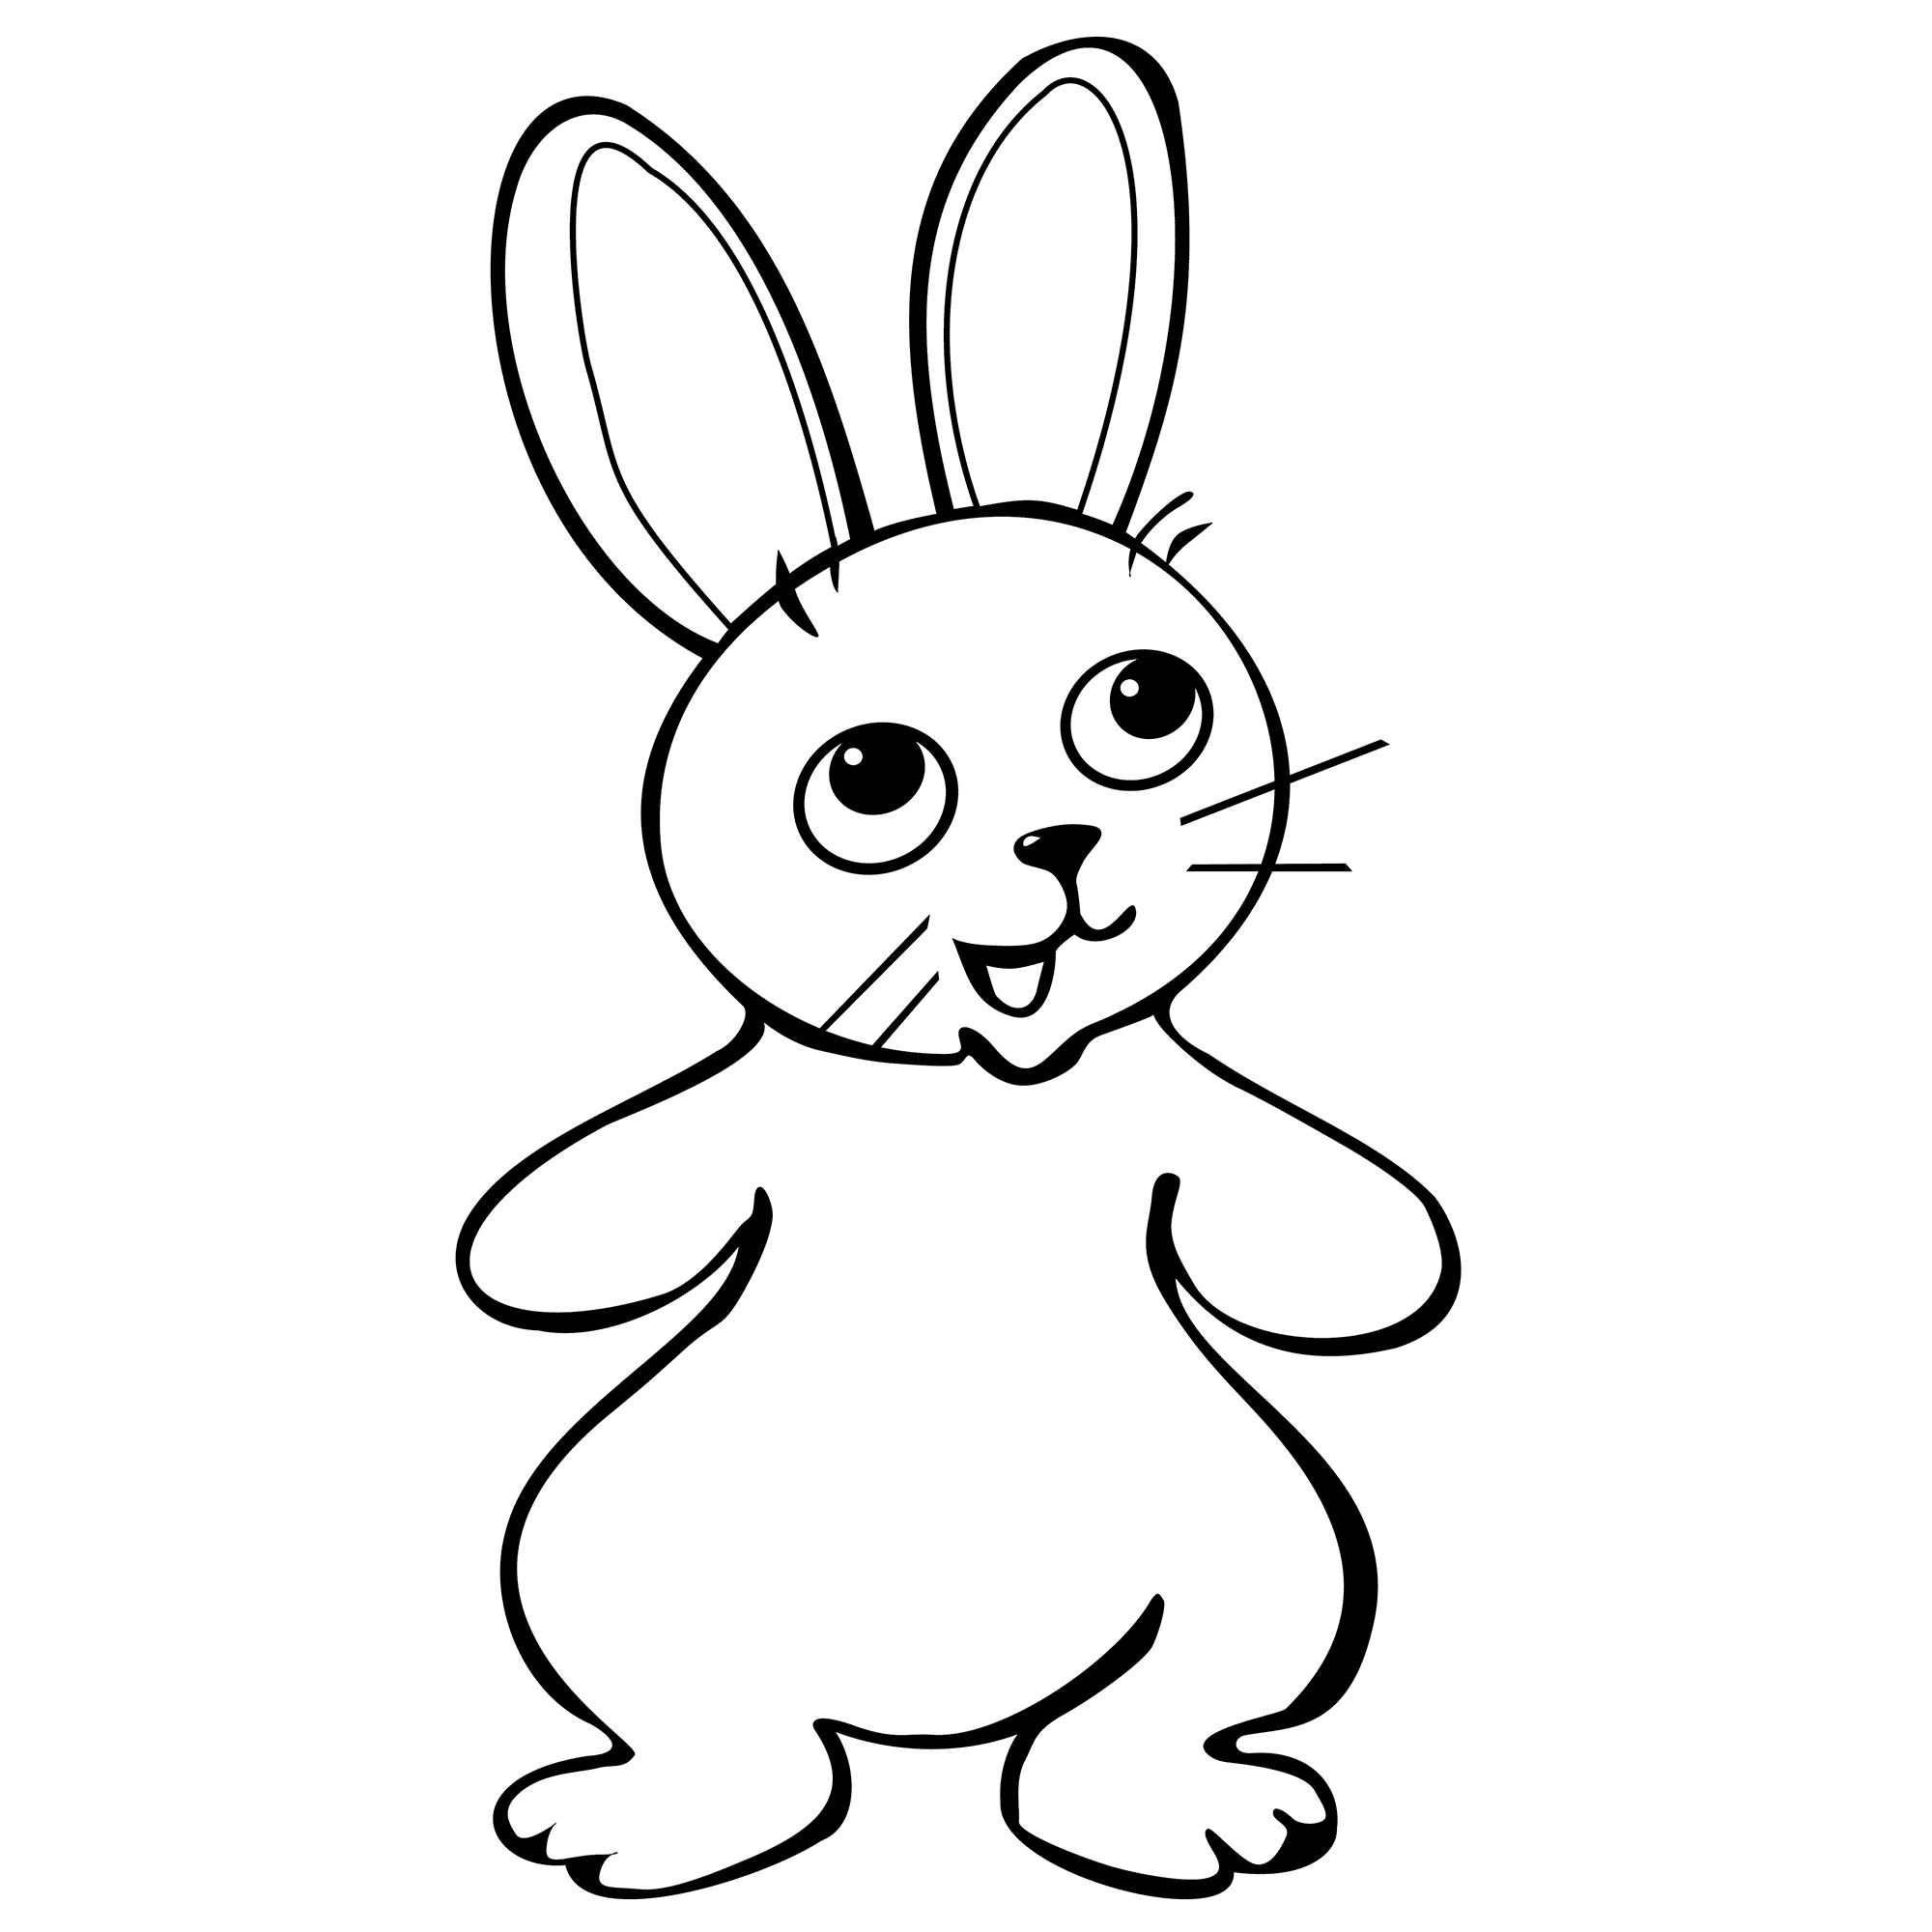 620 Cartoon Printable Bunny Rabbit Coloring Pages with Printable